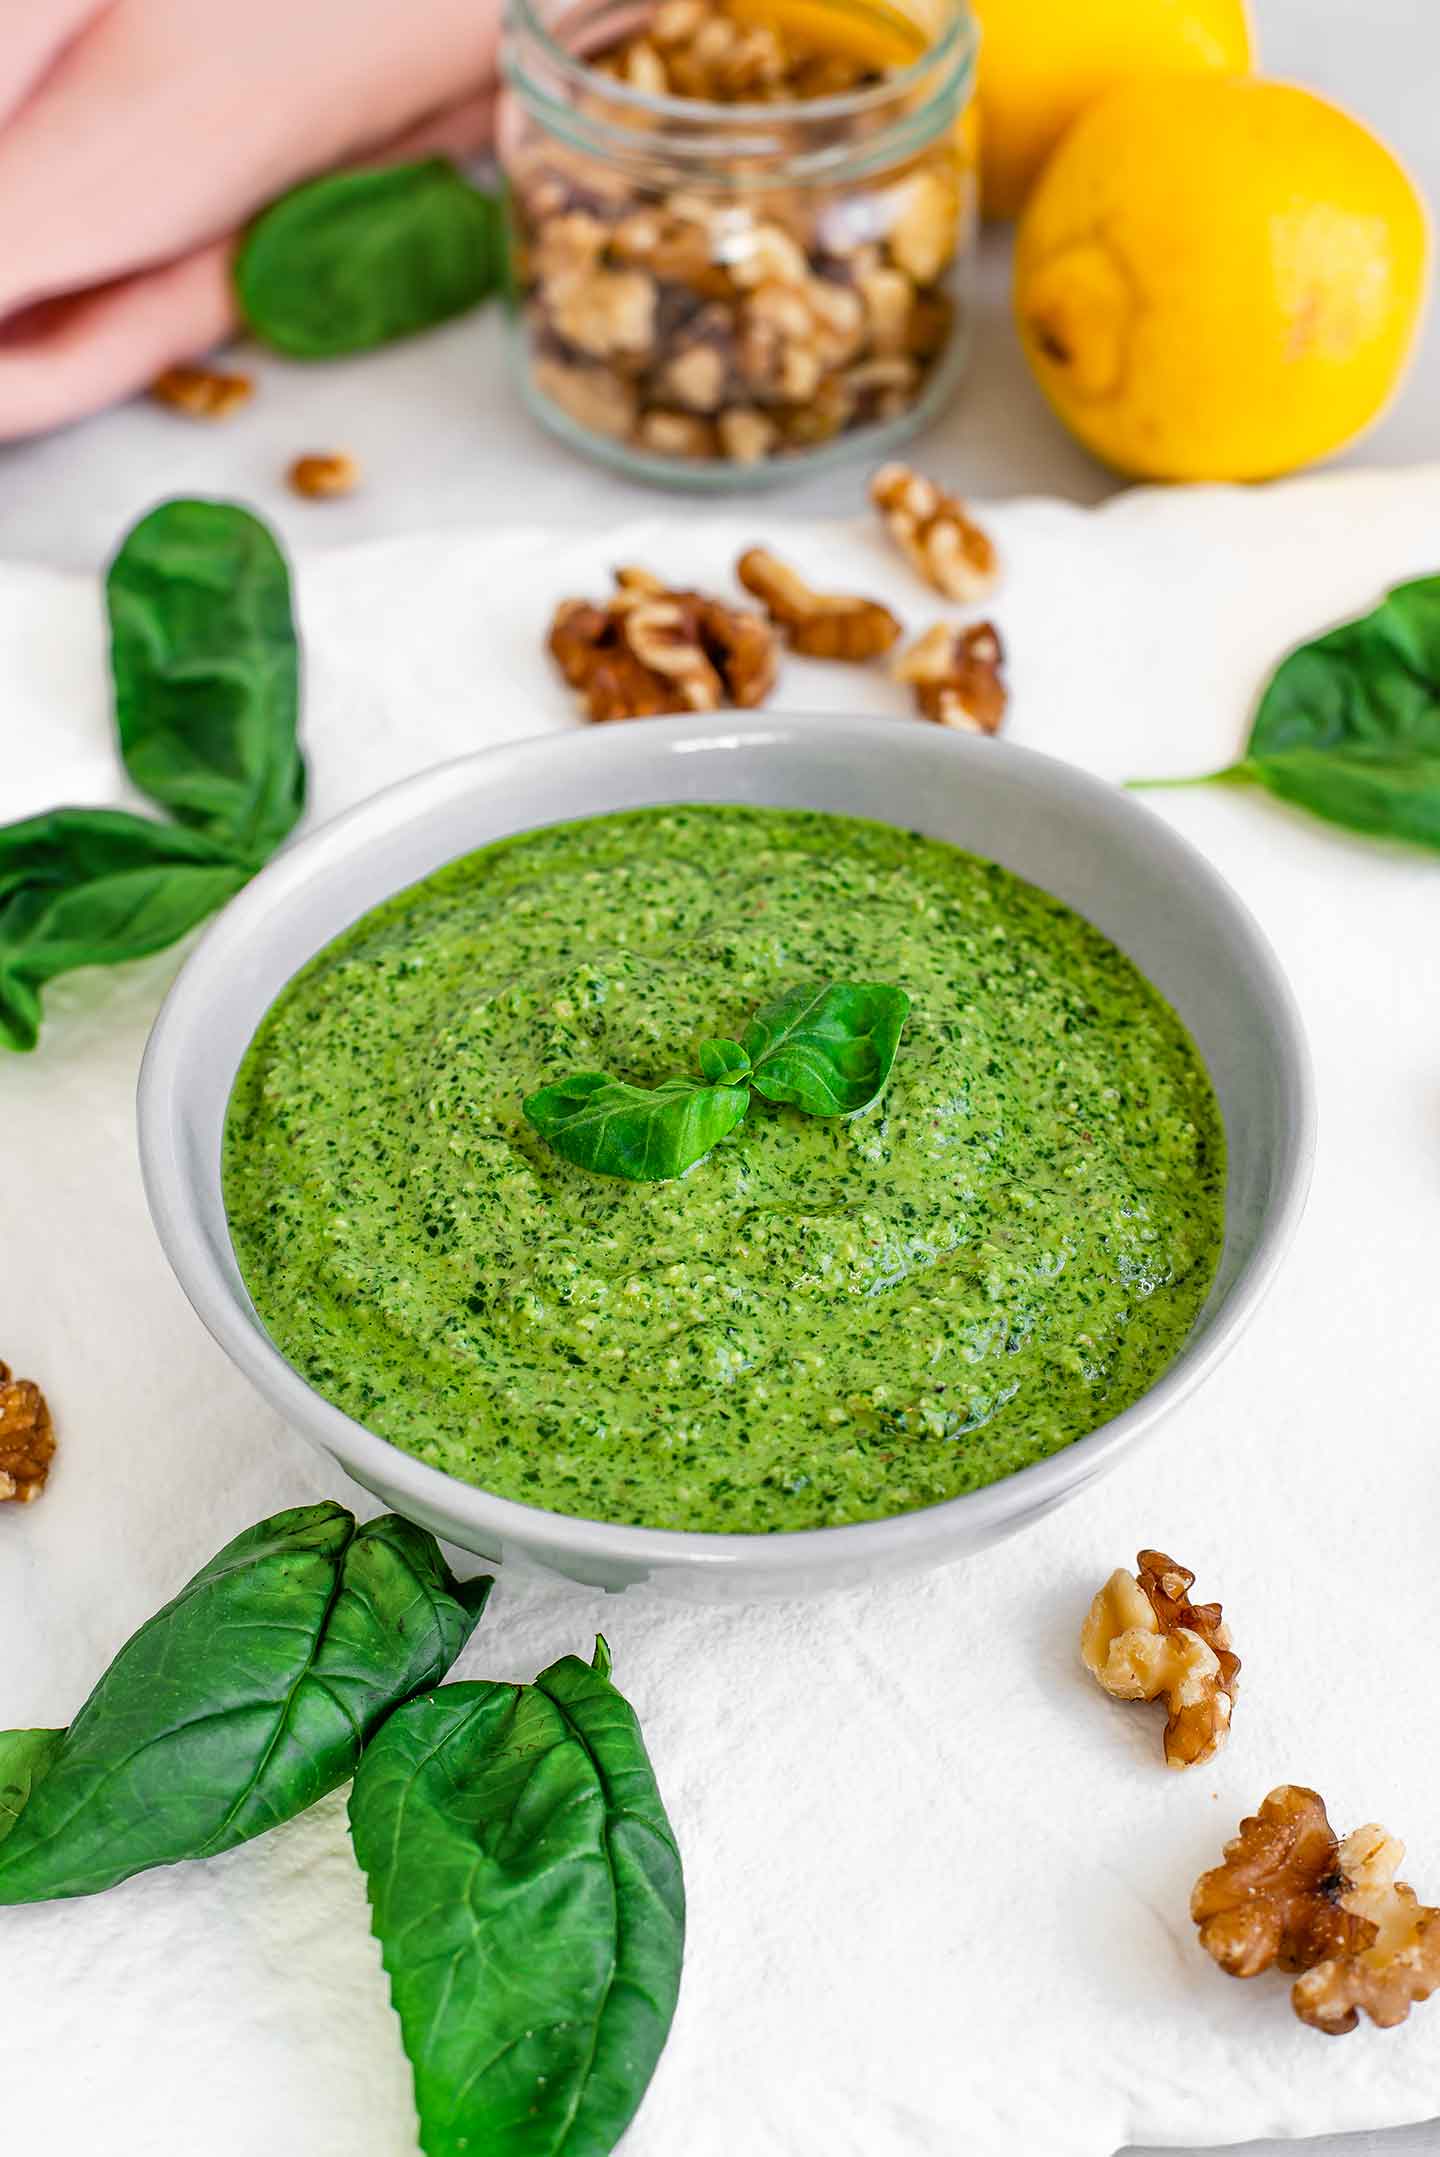 Side view of basil pesto in a dish with small basil leaves garnishing the top. Walnuts, more basil, and a lemon surround the dish.